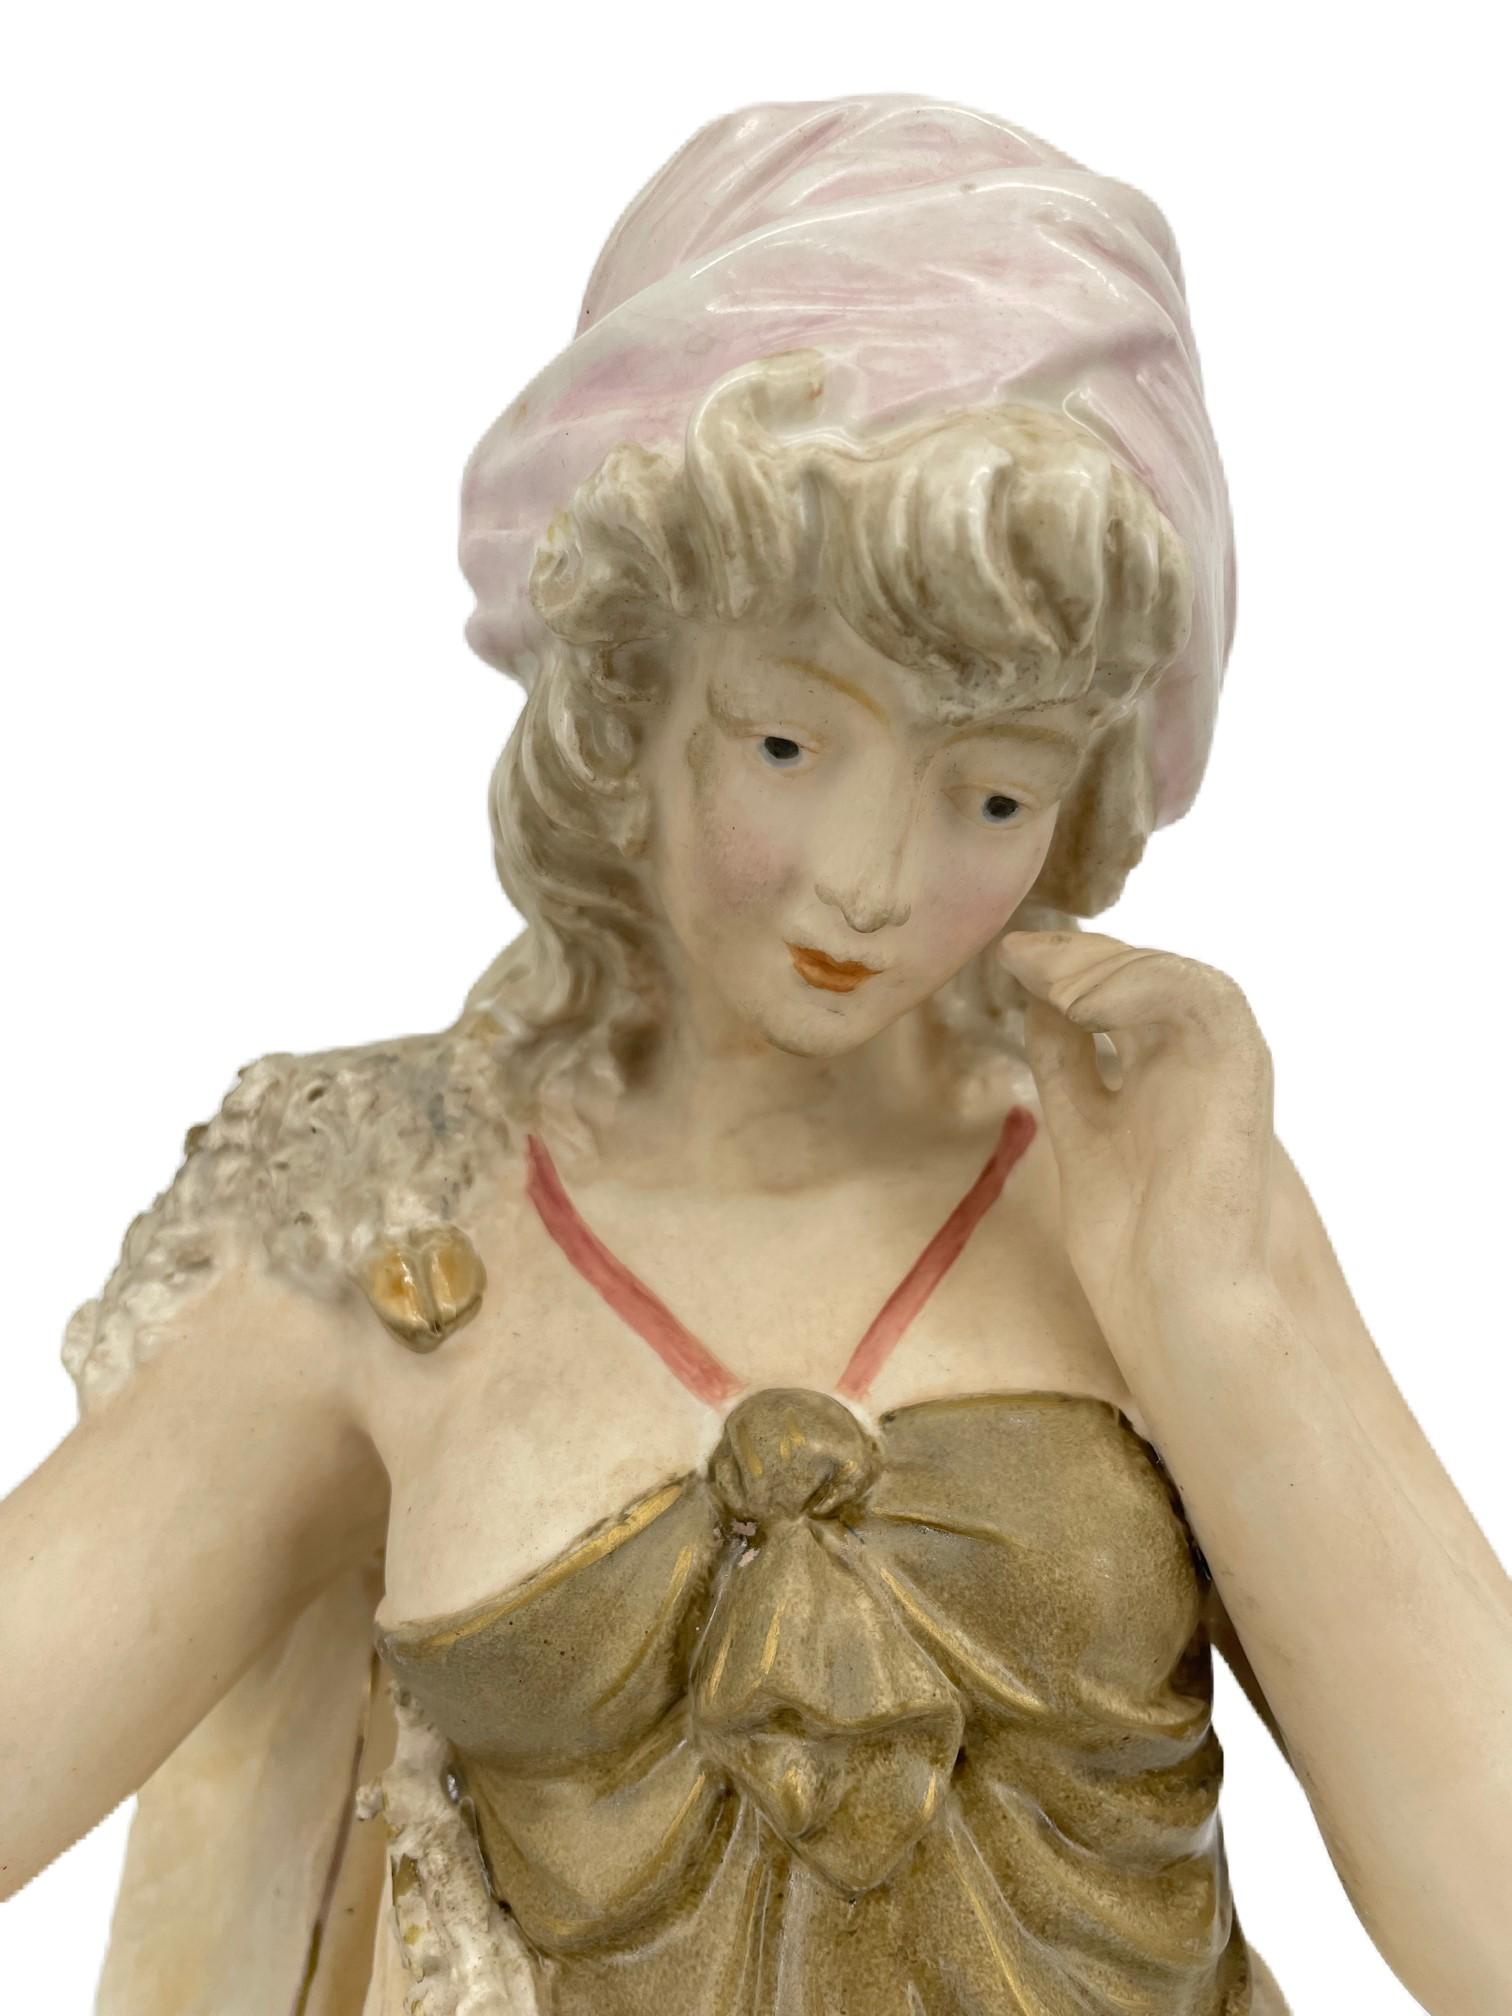 Wonderfully designed shepherdess made by Royal Dux Bohemia.
Marked with the pink triangular stamp of Eduard Eichler.
Factory no. 352. In excellent condition. 
The factory Royal Dux , porcelain brand Bohemia , was shown at the beginning of xx th